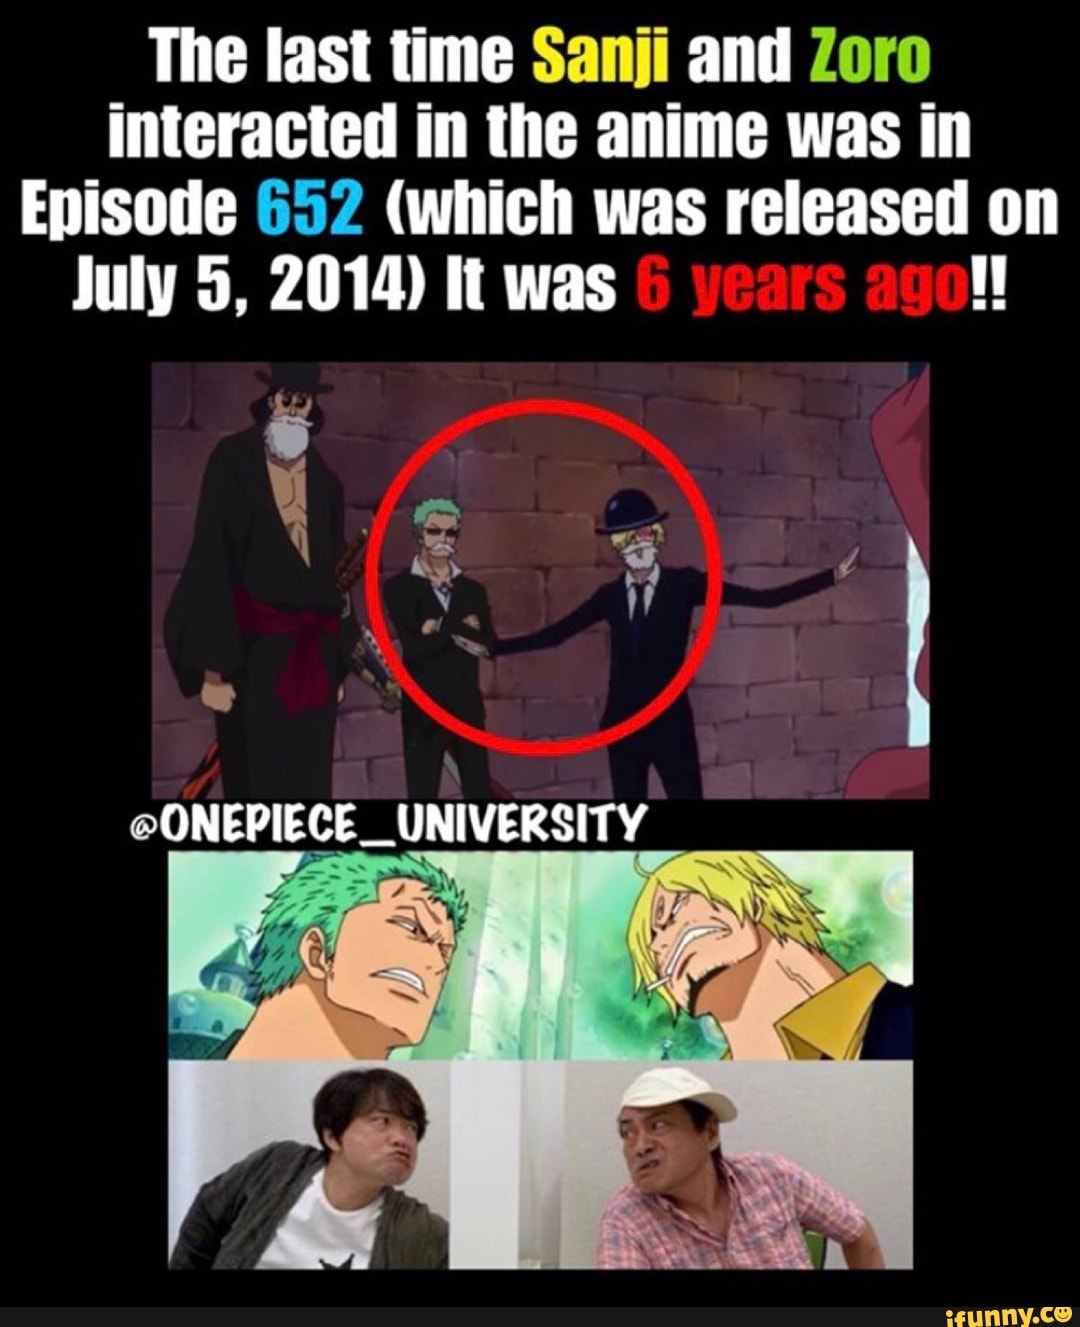 The Last Time Sanji And Zoro Interacted In The Anime Was In Episode 652 Which Was Released On July 5 14 It Was Onepiece University